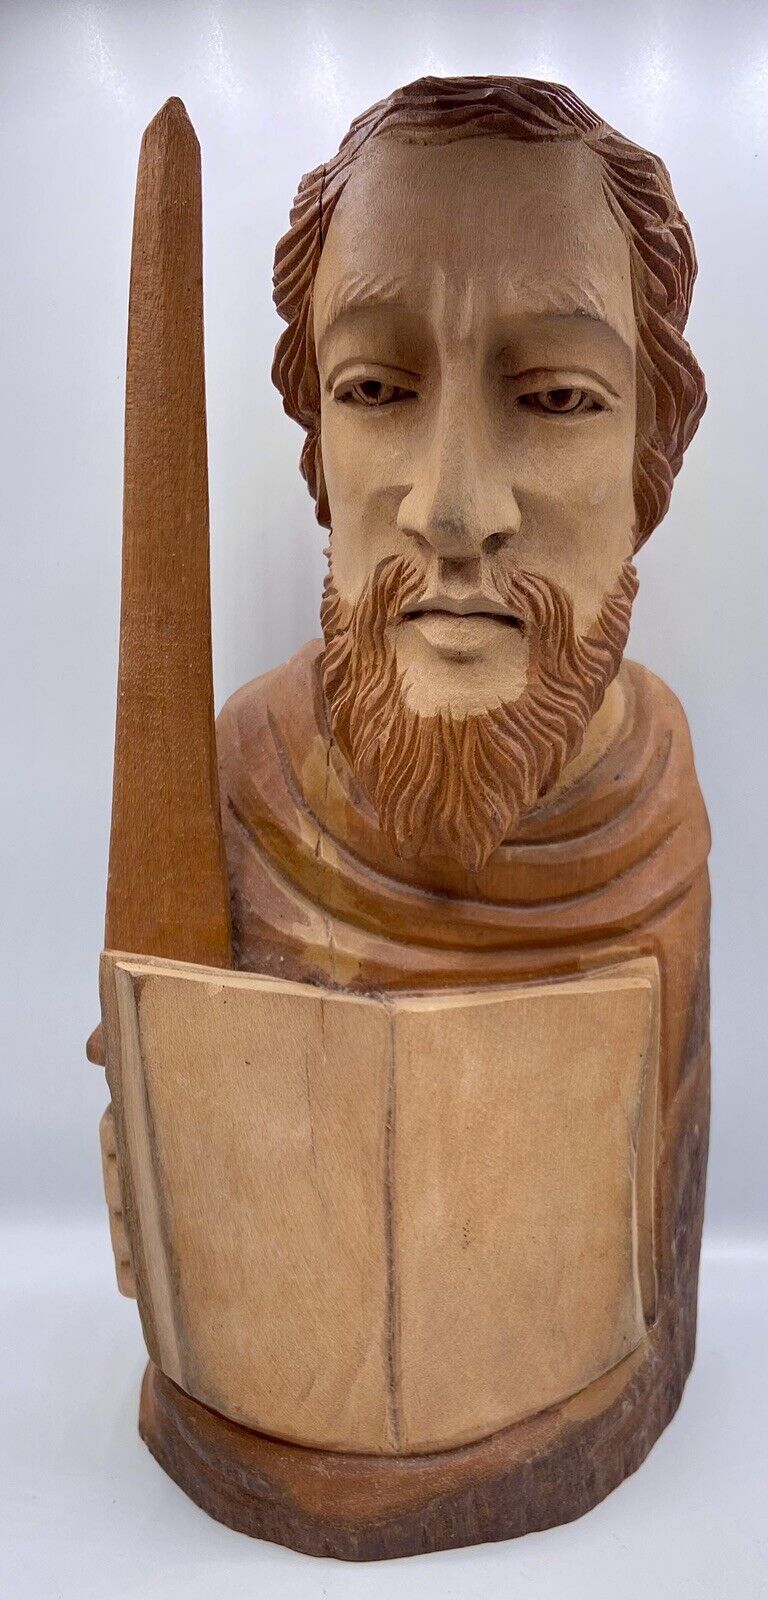 Hand Carved Vintage Wooden Saint Paul the Apostle 10” Statue. Rare